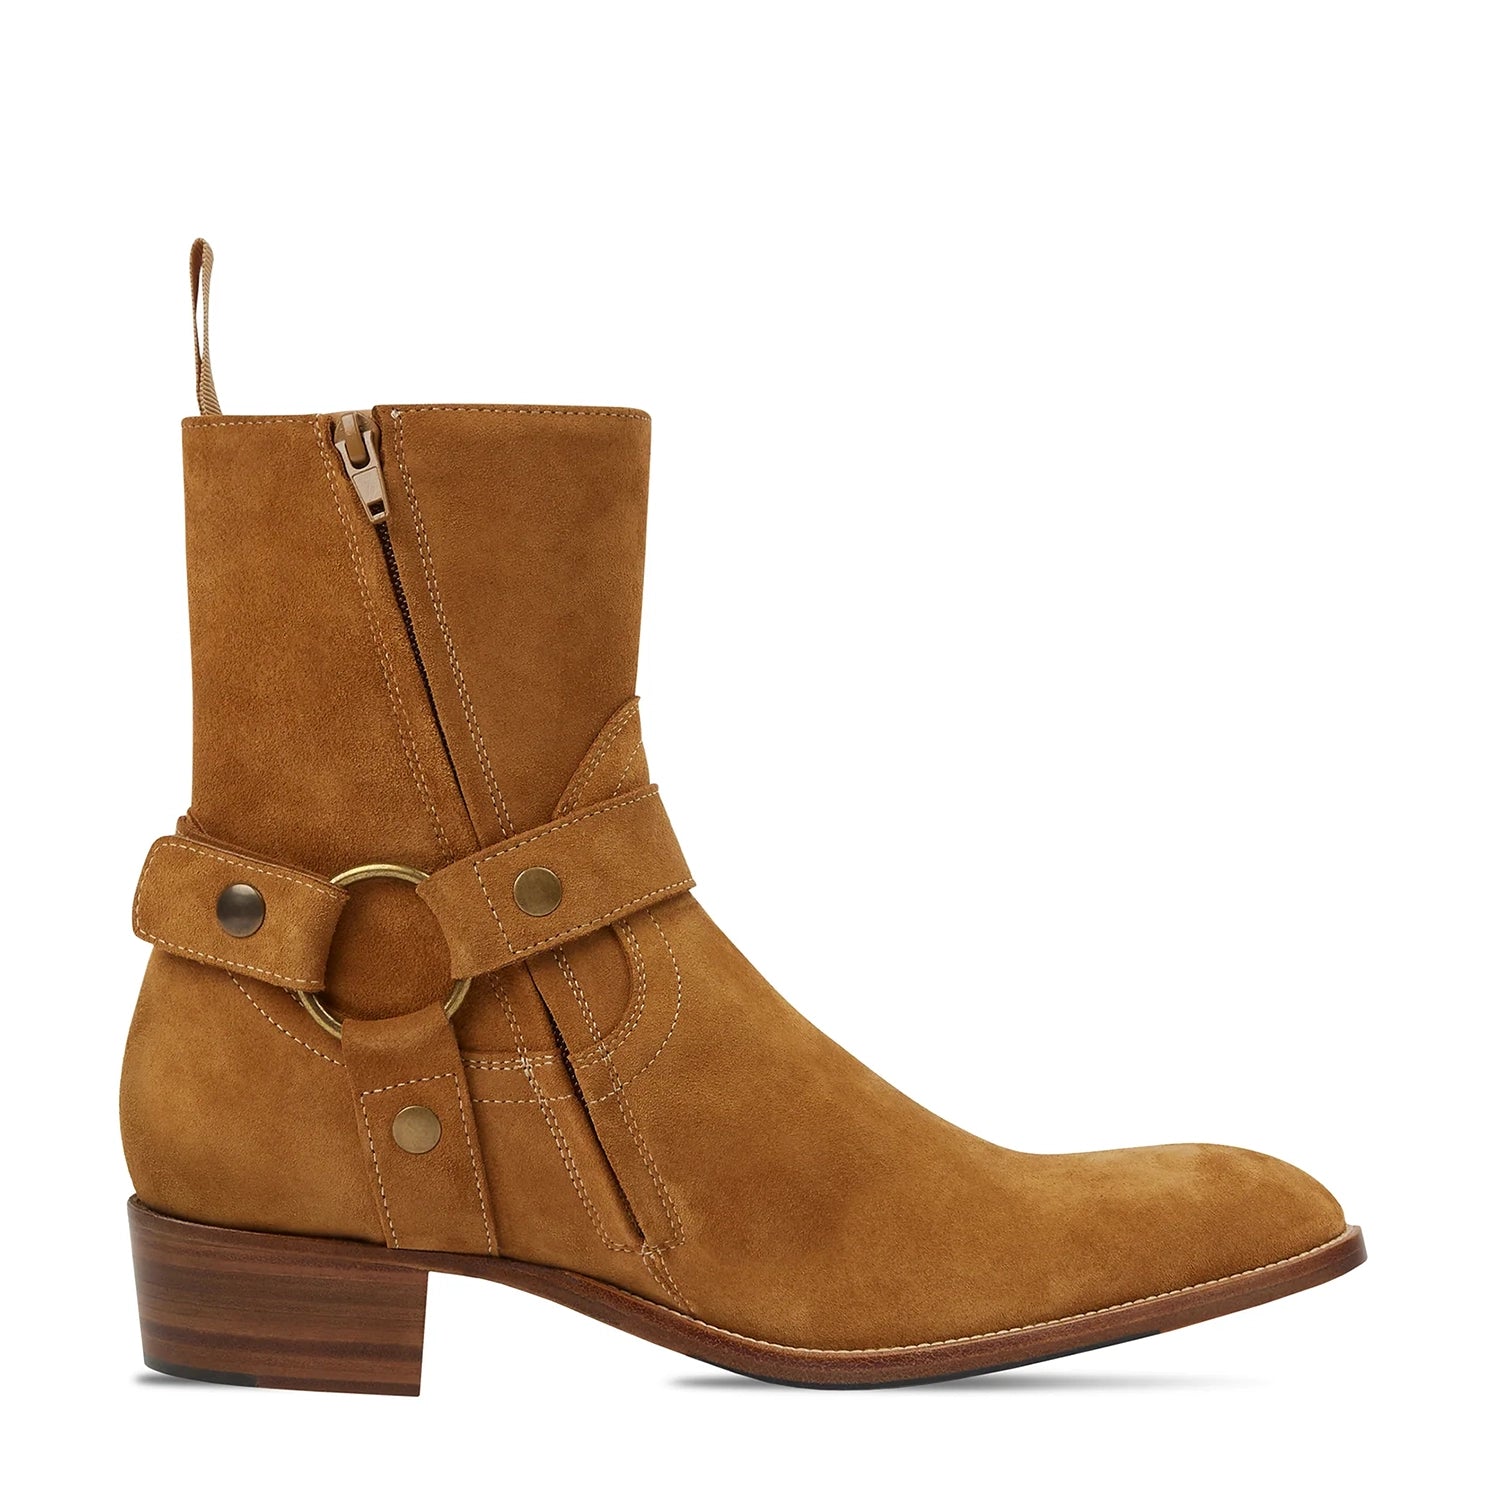 Harness Zip Boot - Nut Suede Leather